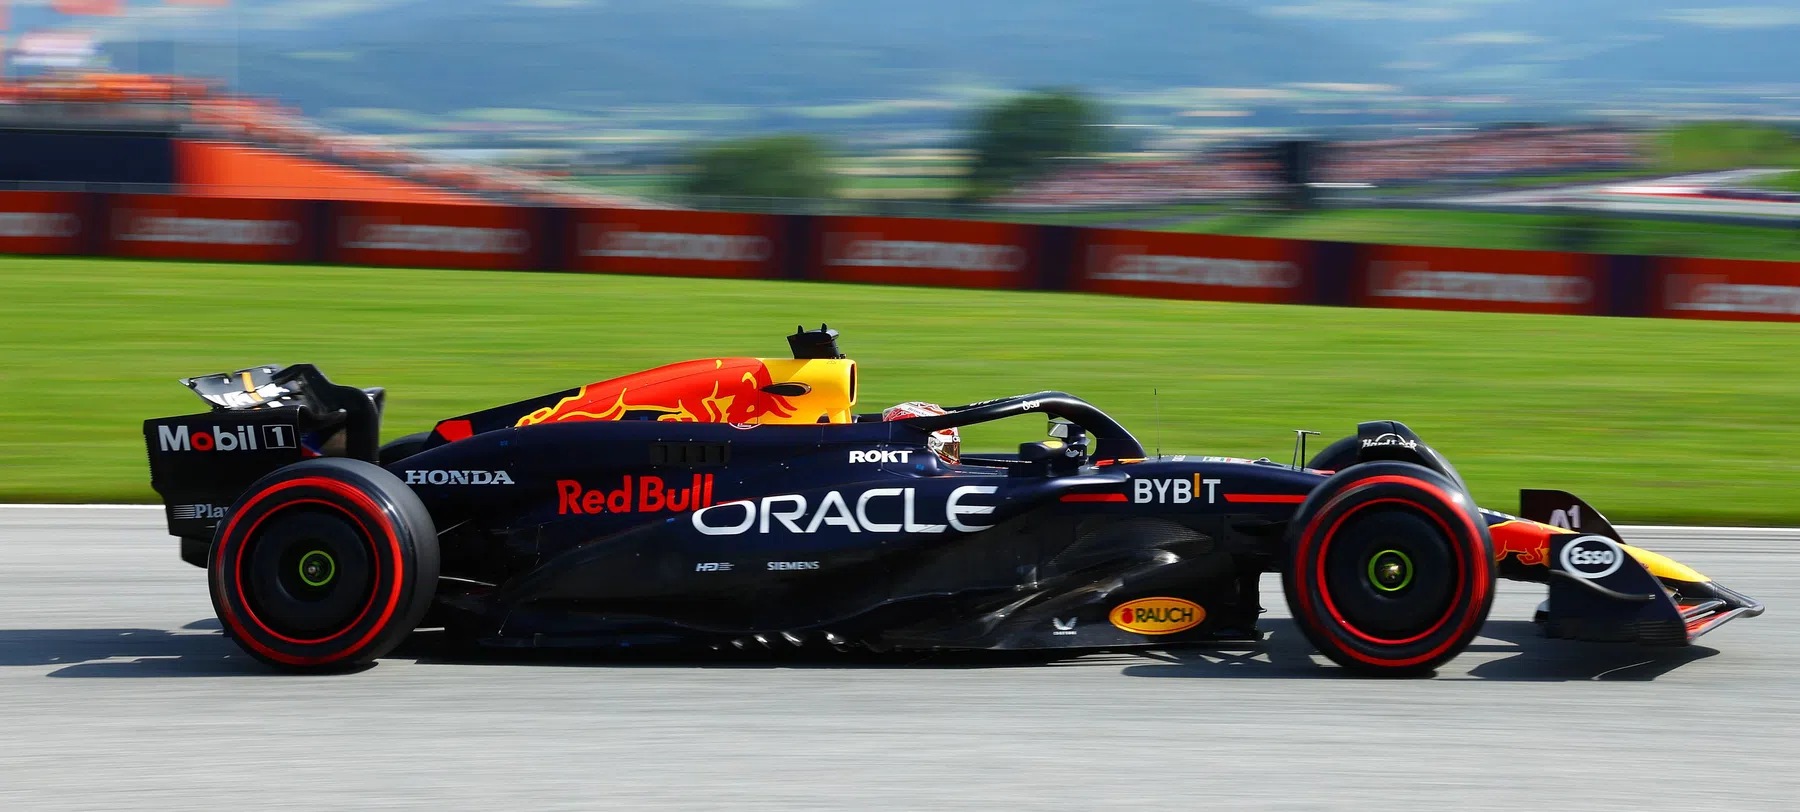 Full Austrian Grand Prix qualifying results with Verstappen on pole